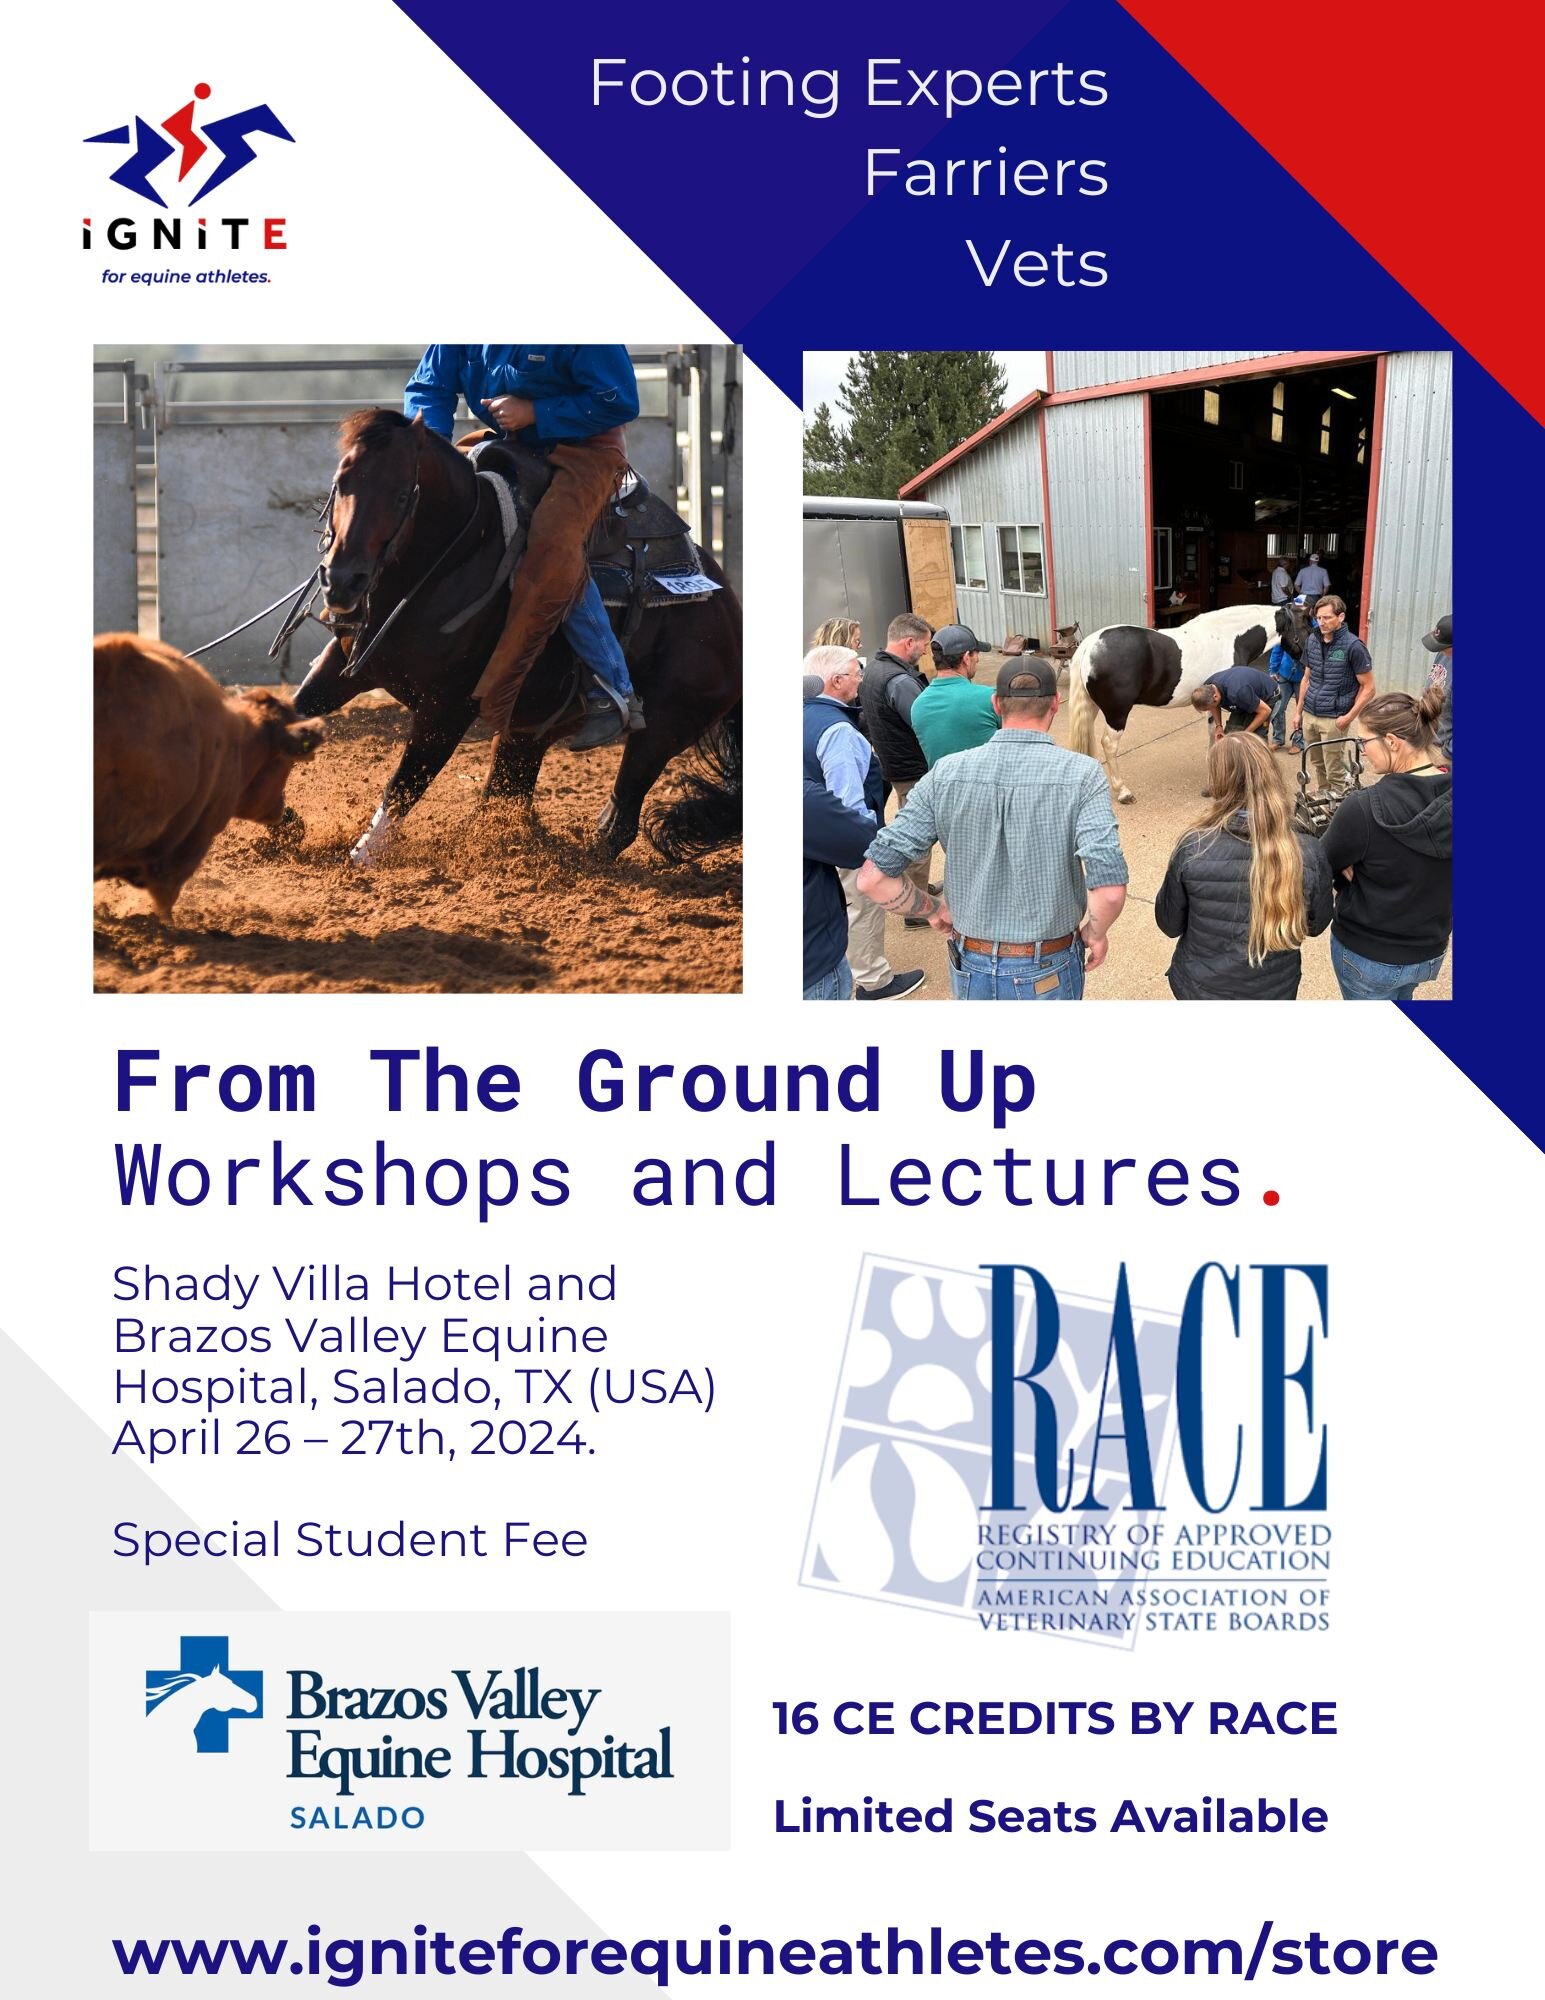 REGISTER NOW! 
April 26-27
16 RACE Approved CE Hours at Brazos Valley Equine Hospitals - Salado!
https://www.igniteforequineathletes.com/store